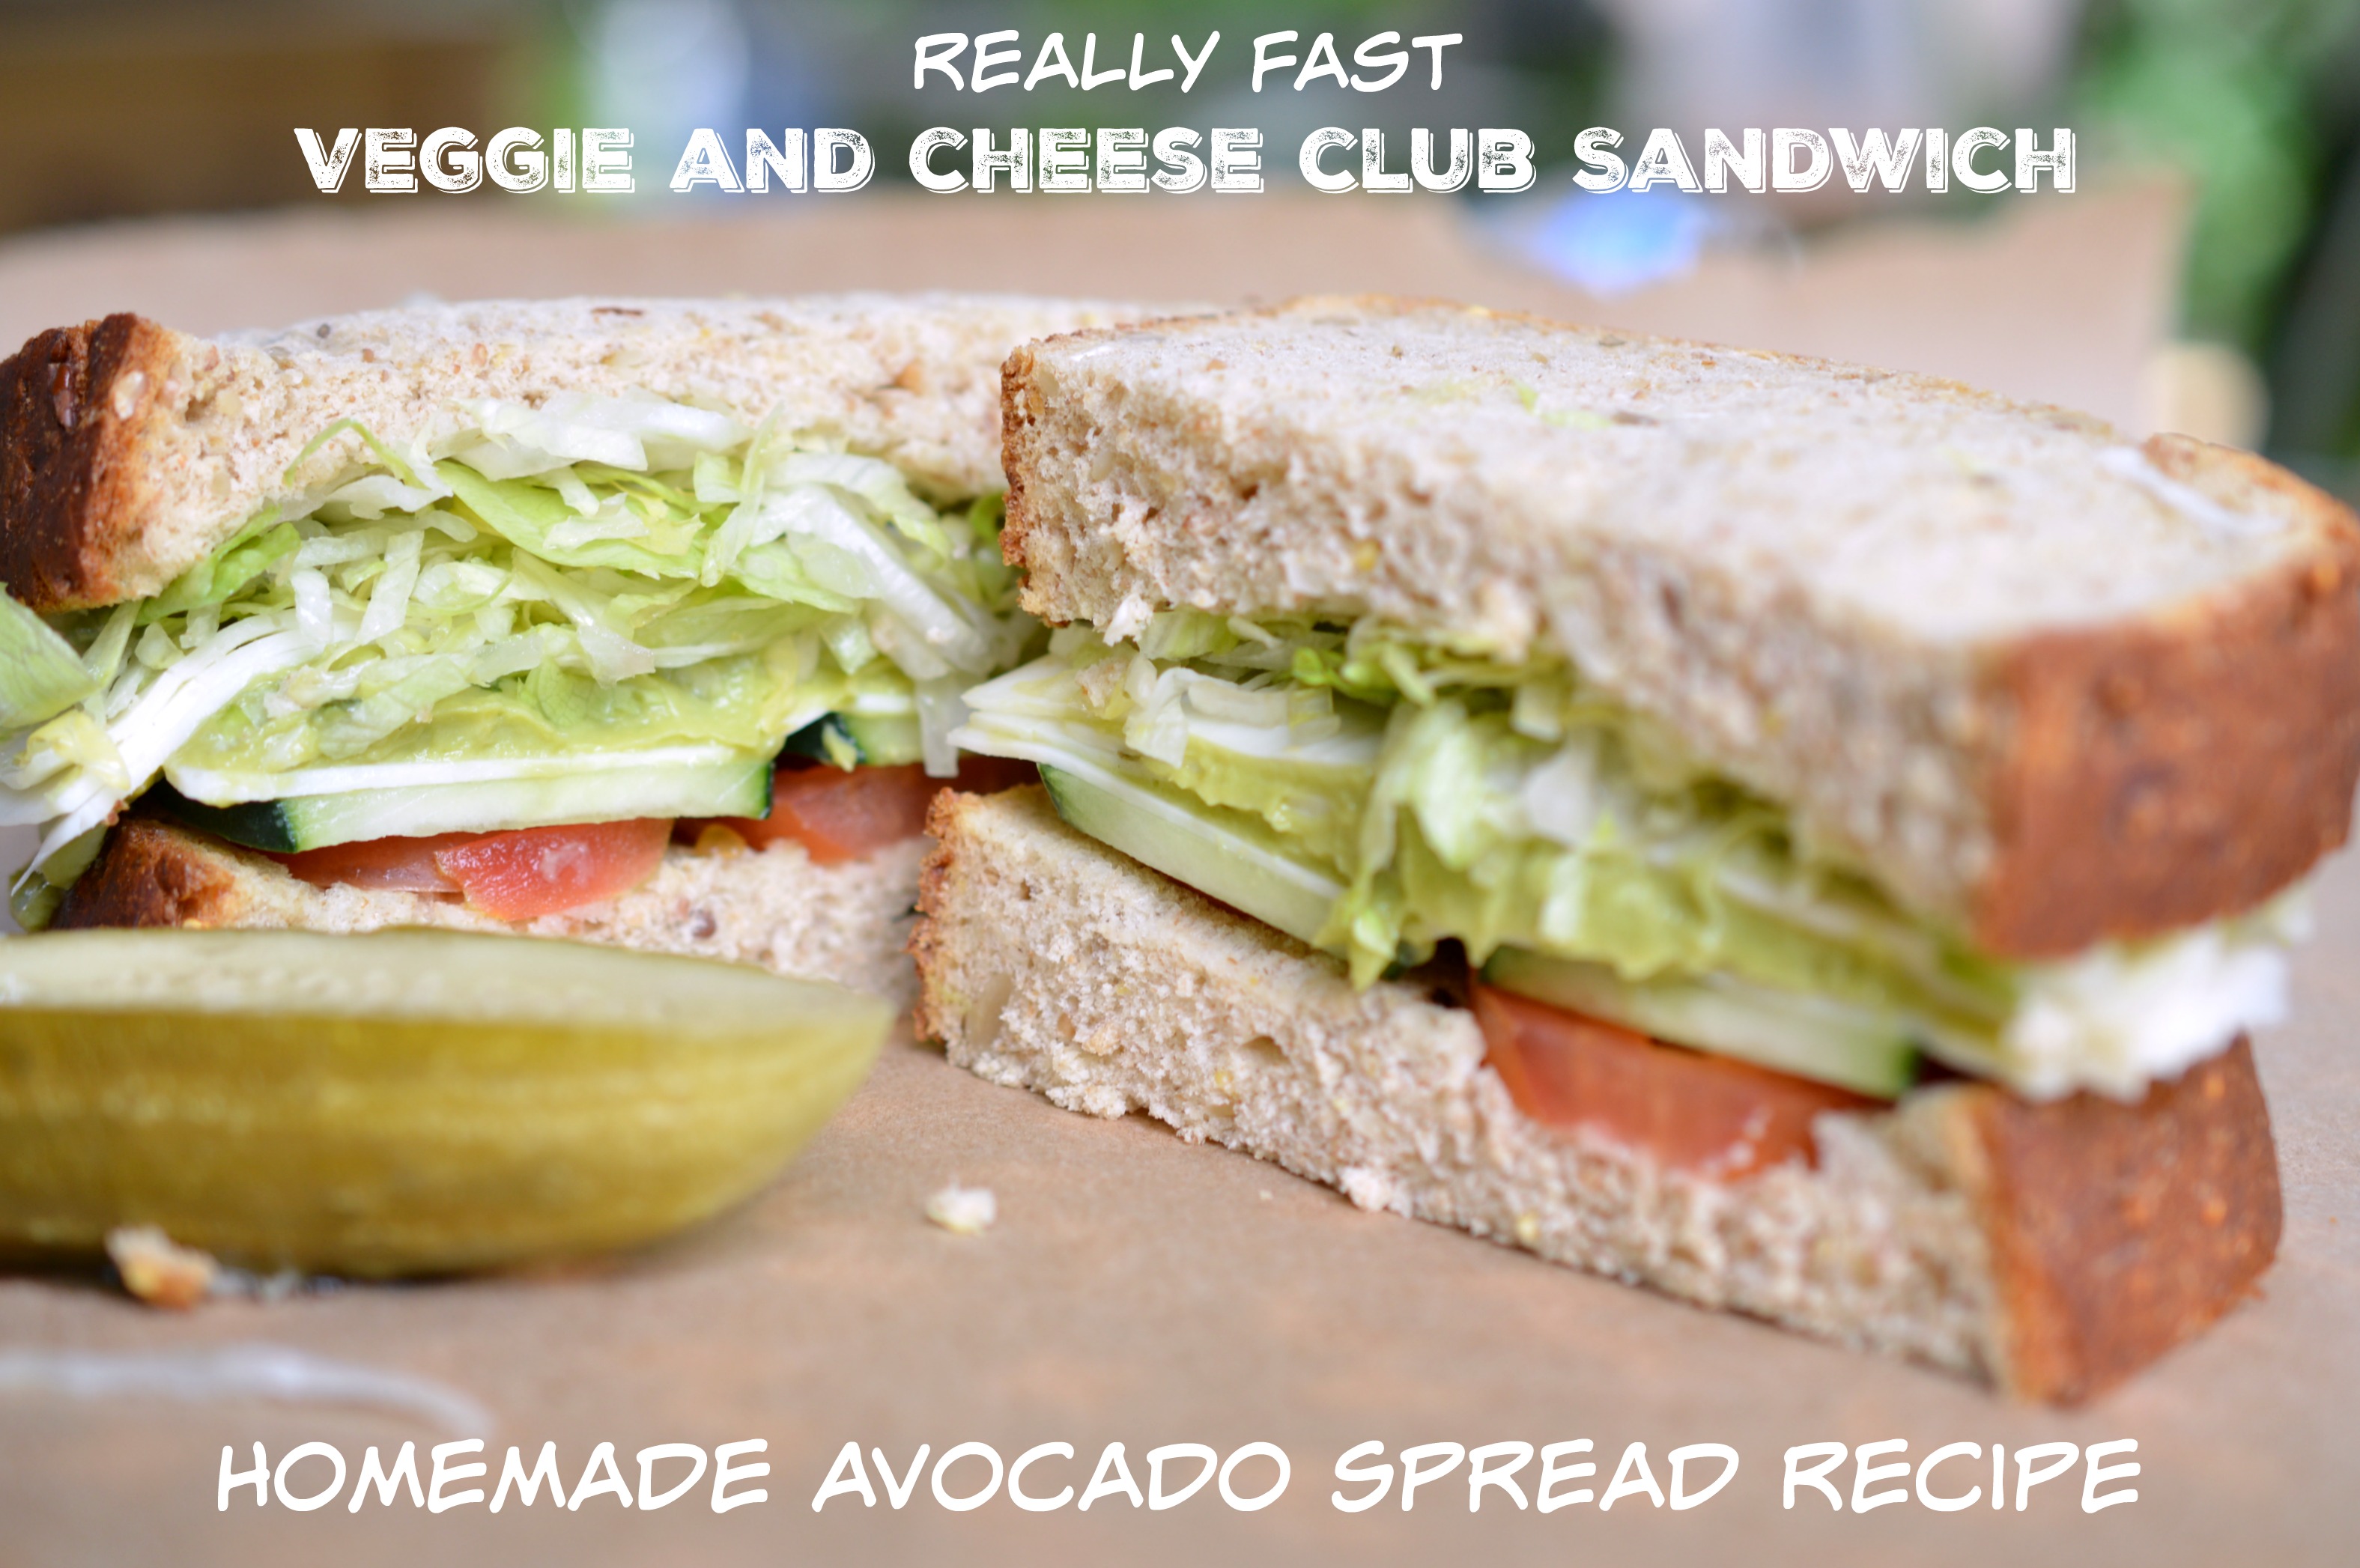 Really Fast Veggie and Cheese Club with Avocado Spread Recipe